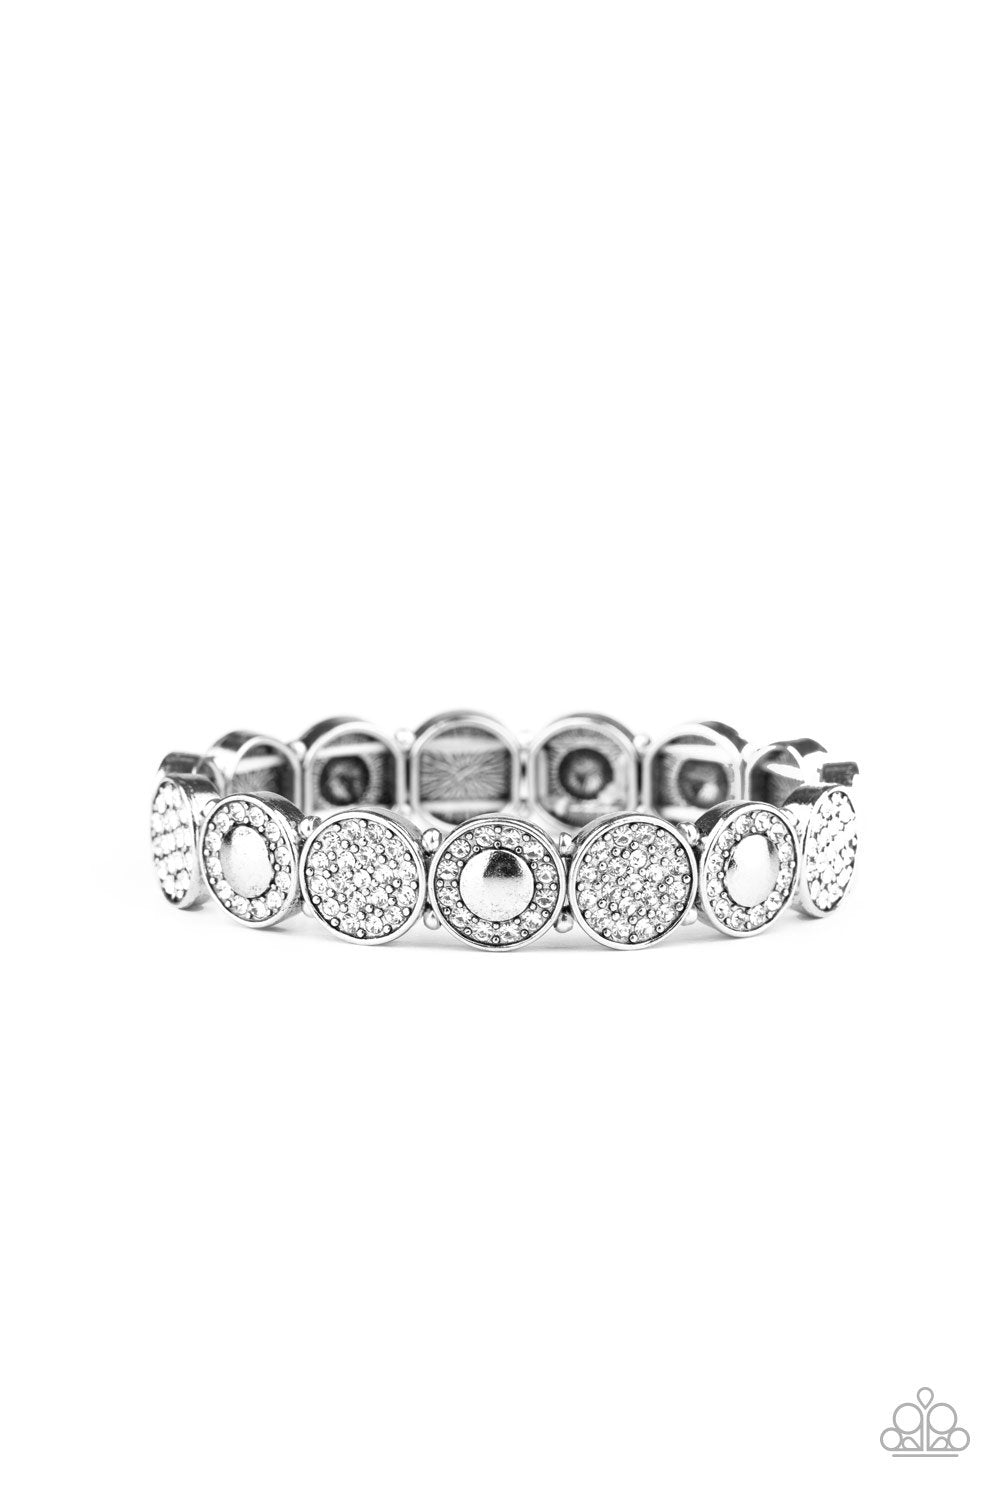 Glamour Garden White Rhinestone and Silver Bracelet - Paparazzi Accessories - lightbox -CarasShop.com - $5 Jewelry by Cara Jewels